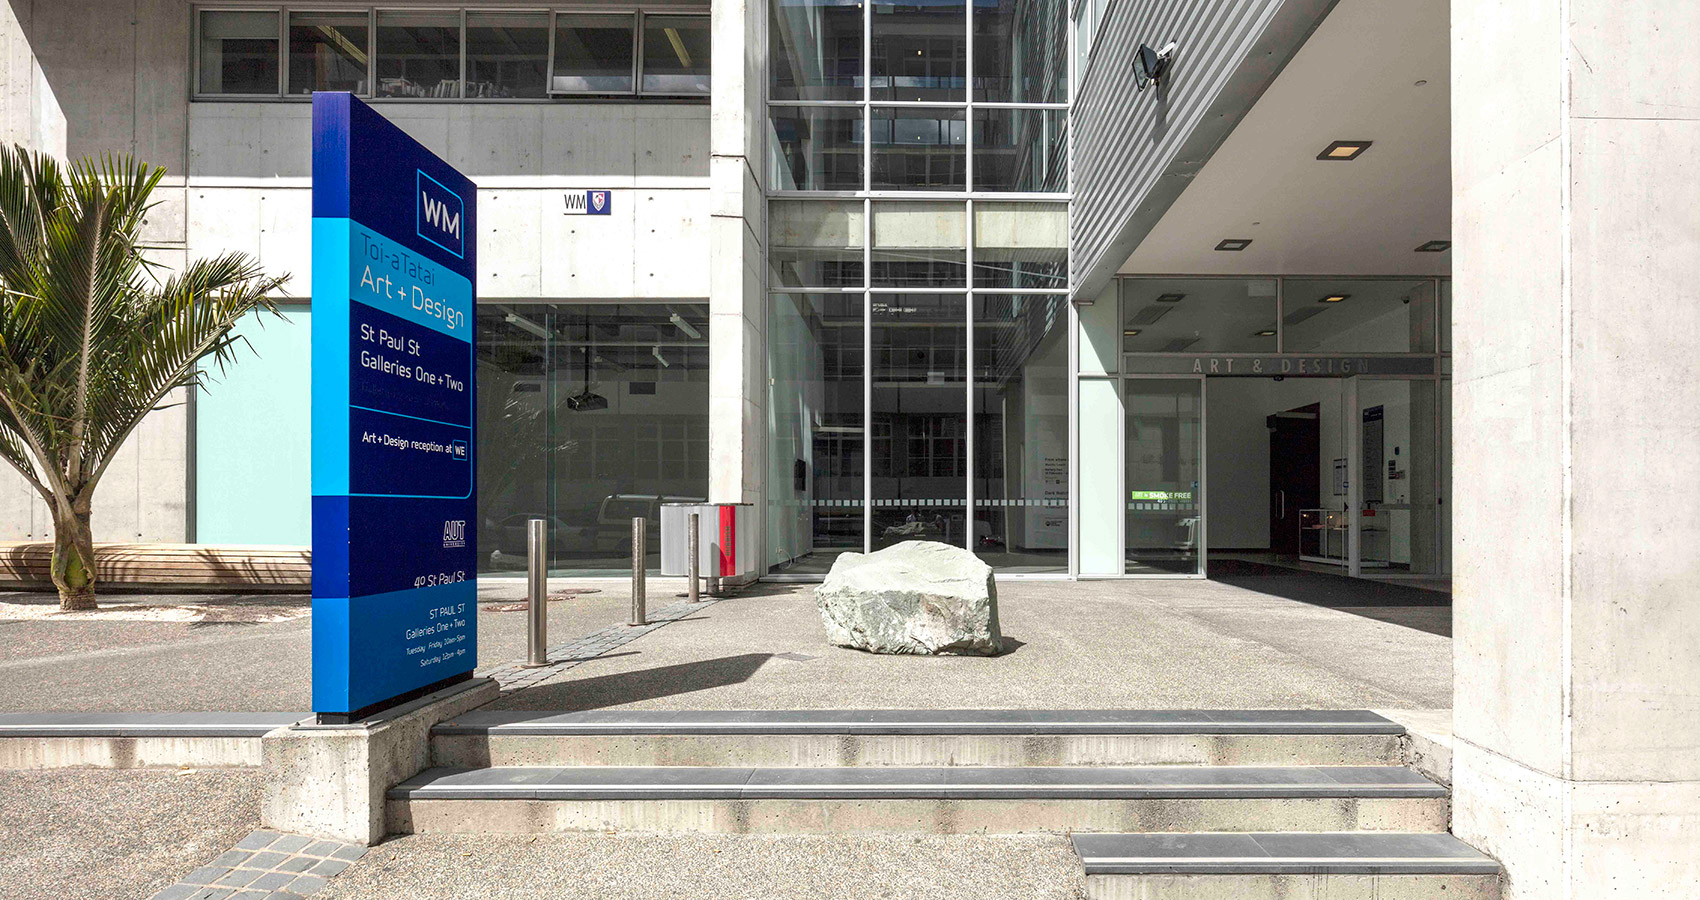 <p>The entrance to ST PAUL St Gallery on campus of AUT University</p>